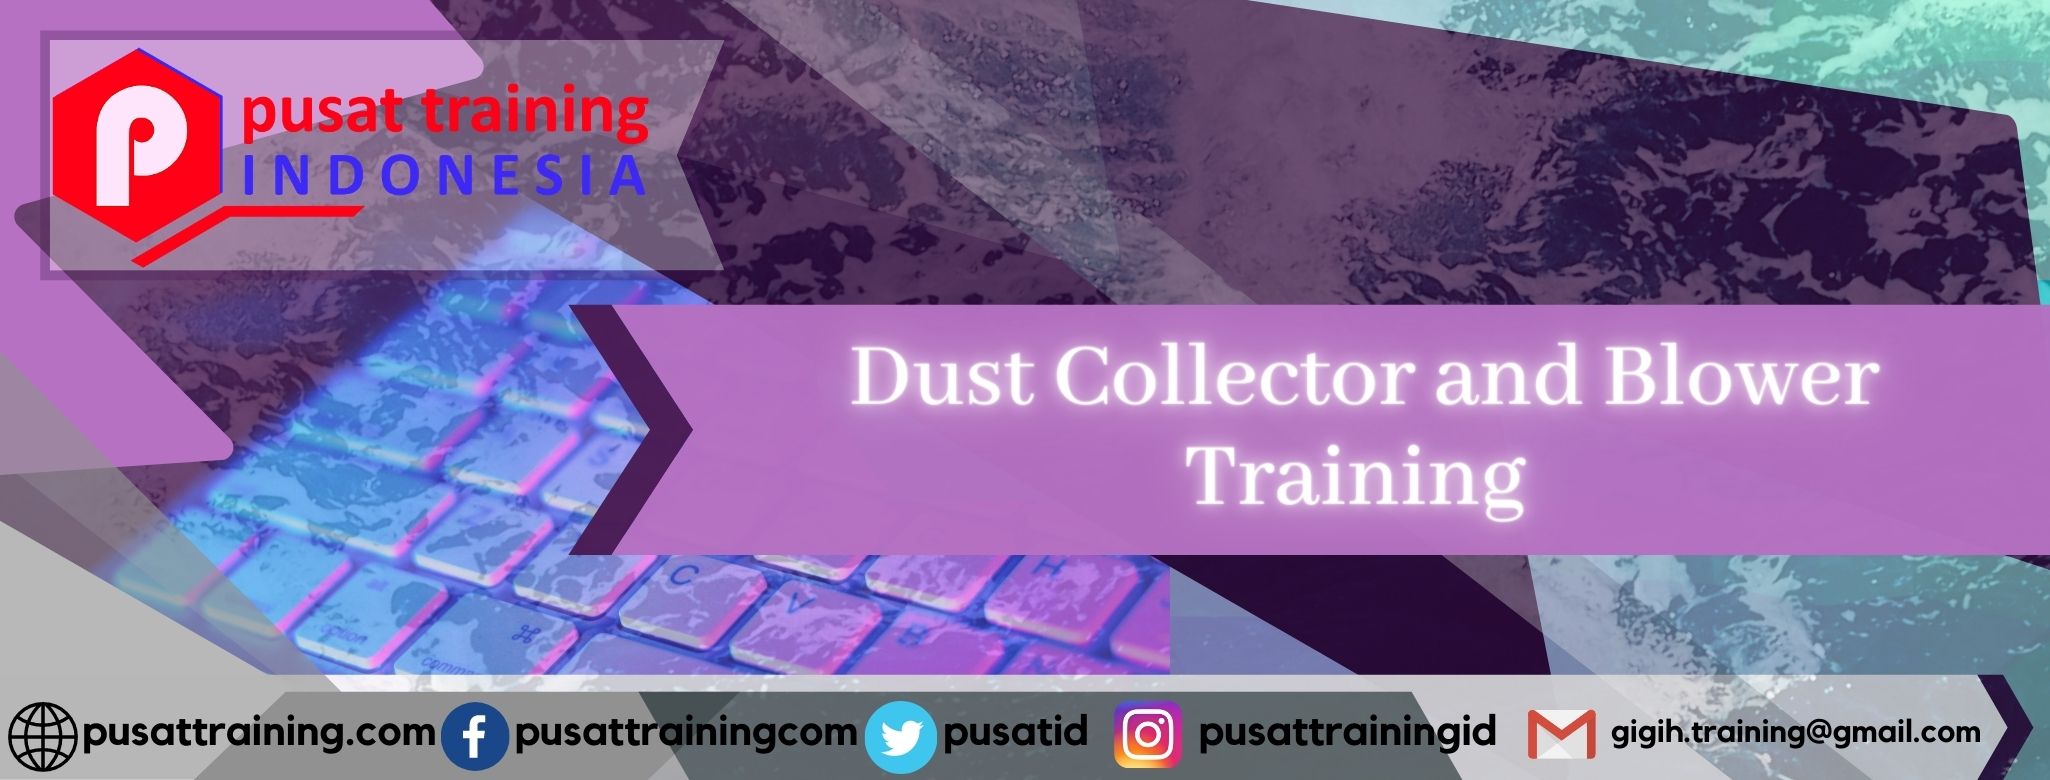 Dust Collector and Blower Training 